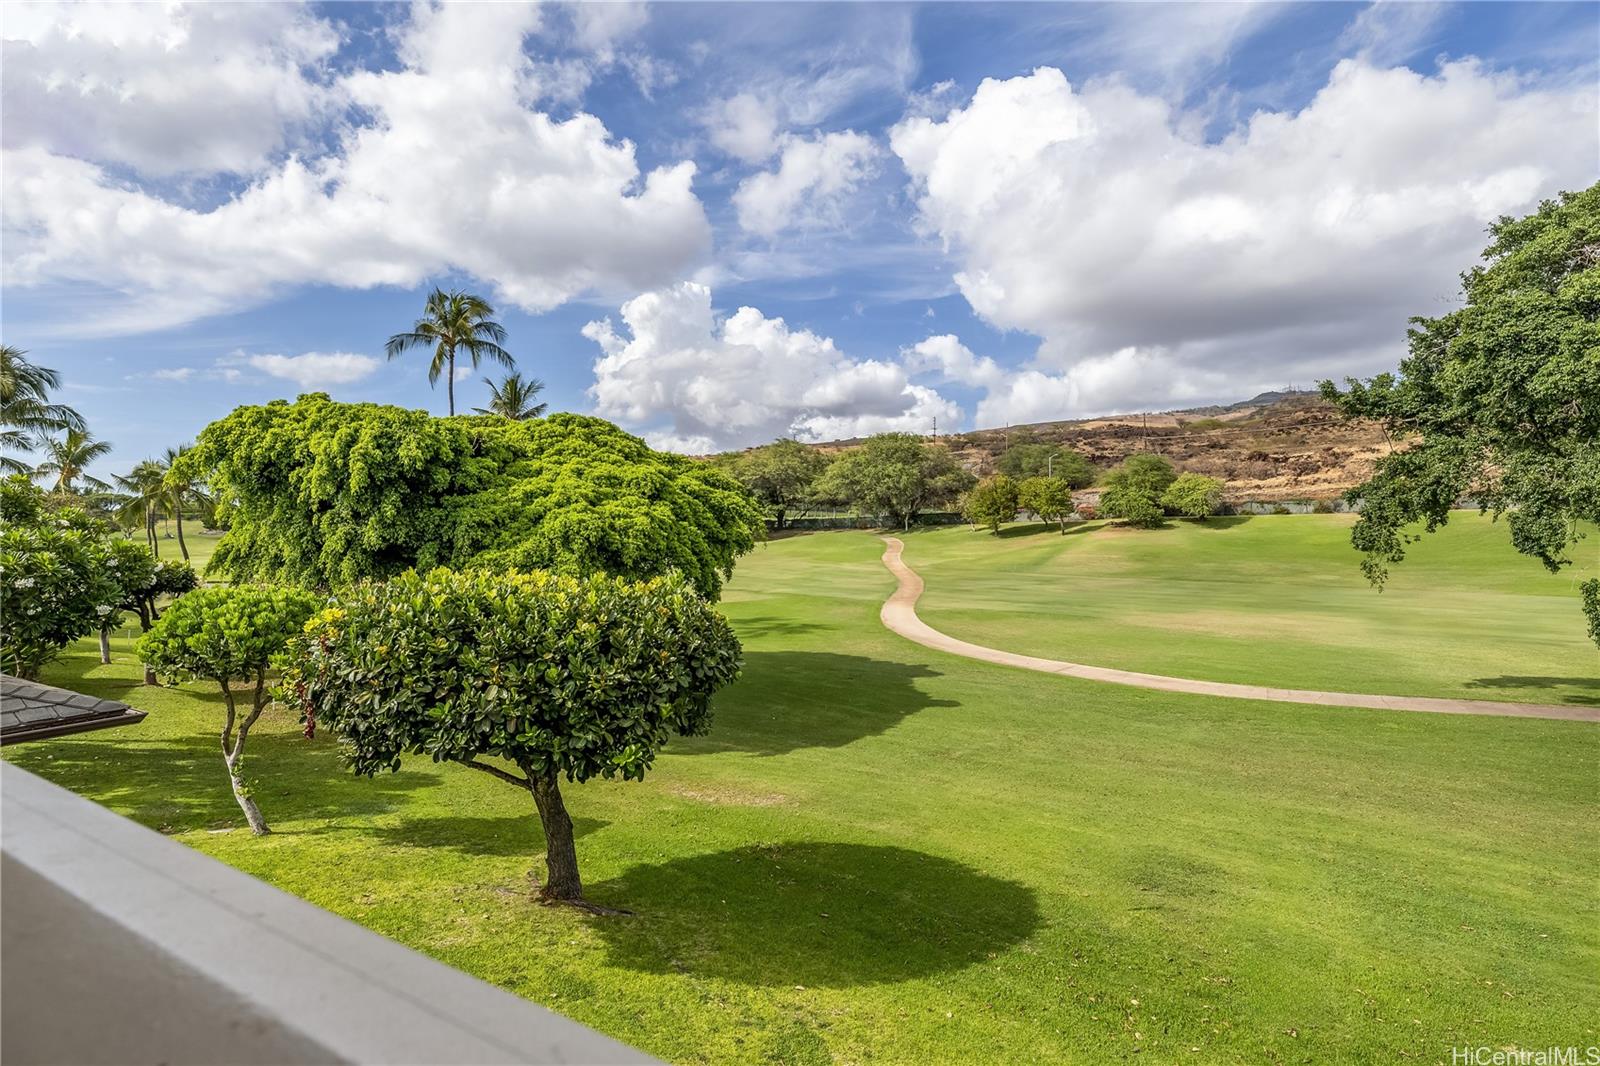 Located on the Ko Olina Golf Course with Golf Course View